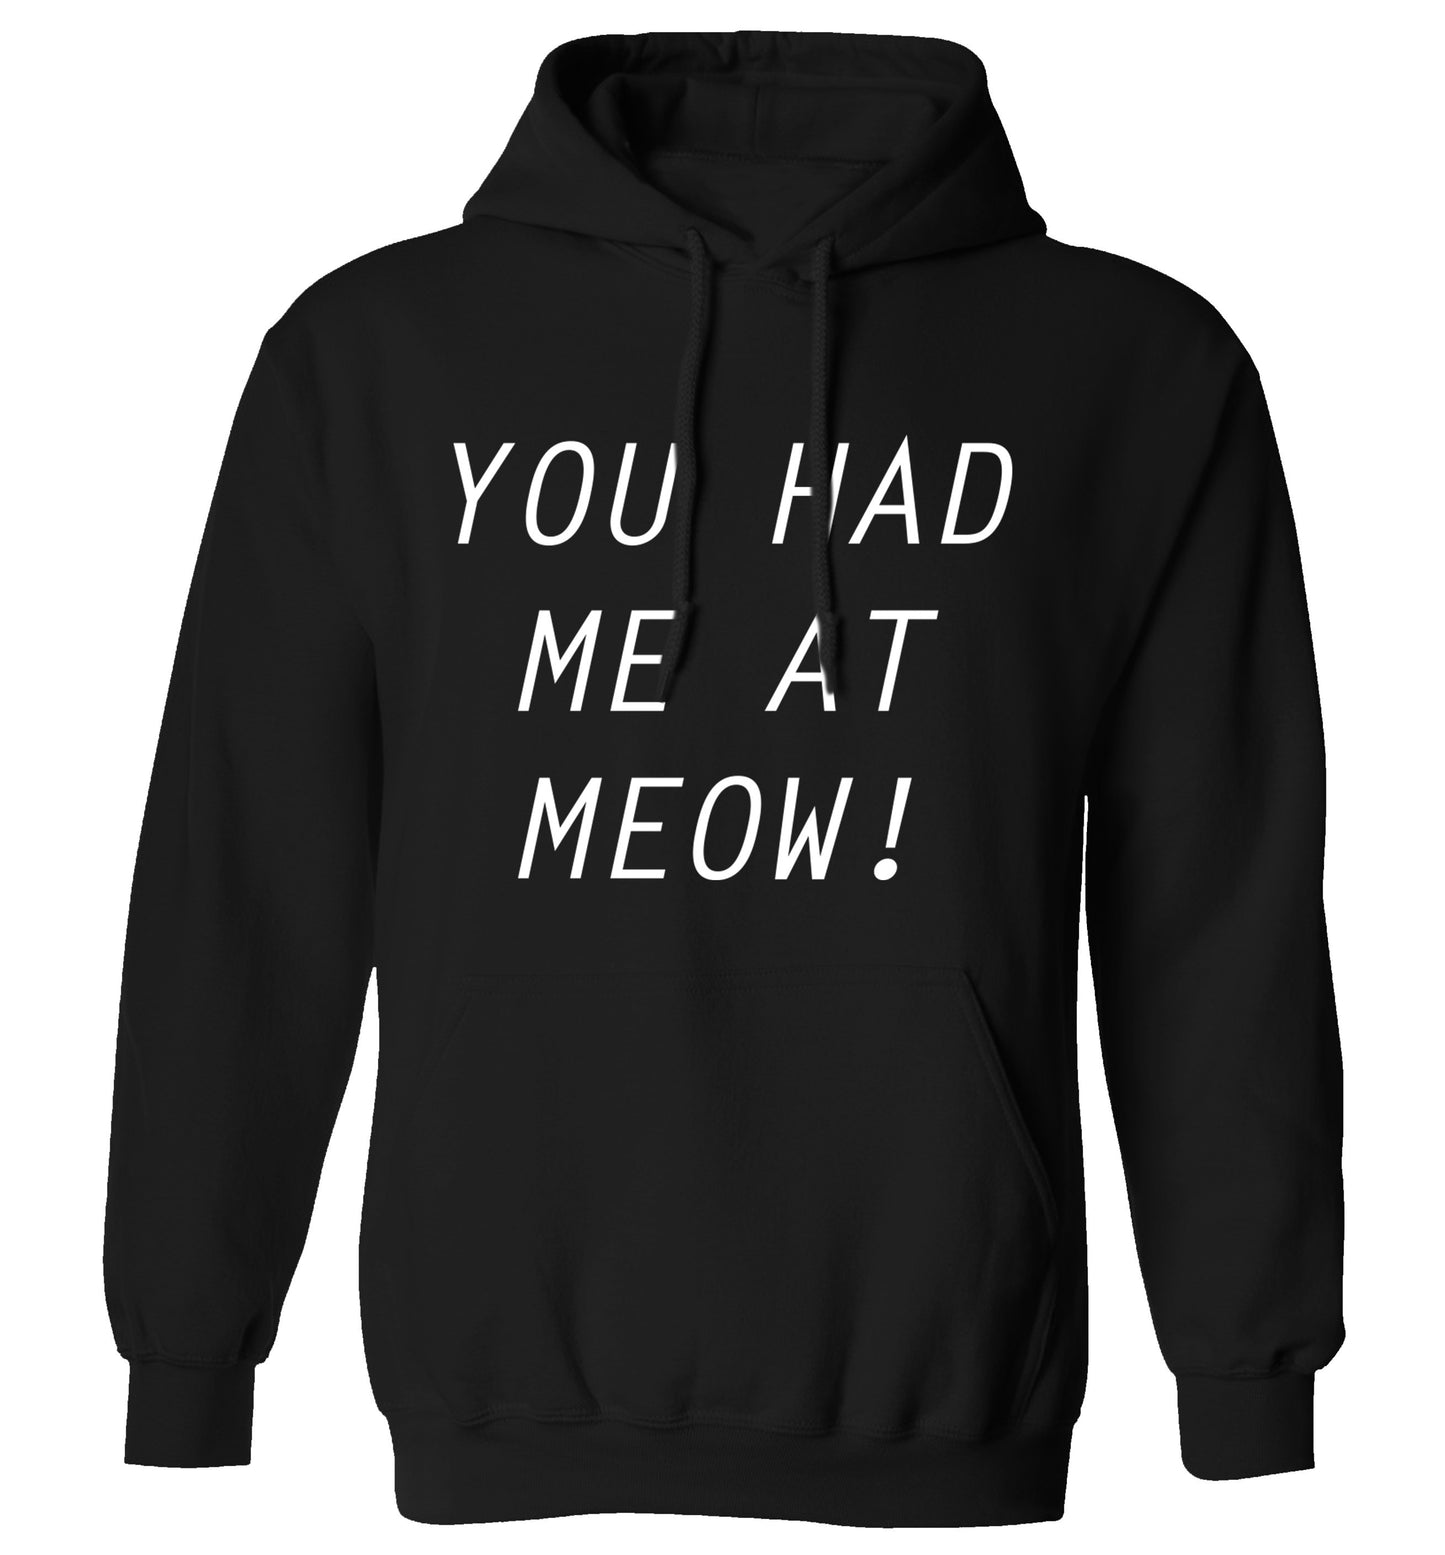 You had me at meow adults unisex black hoodie 2XL